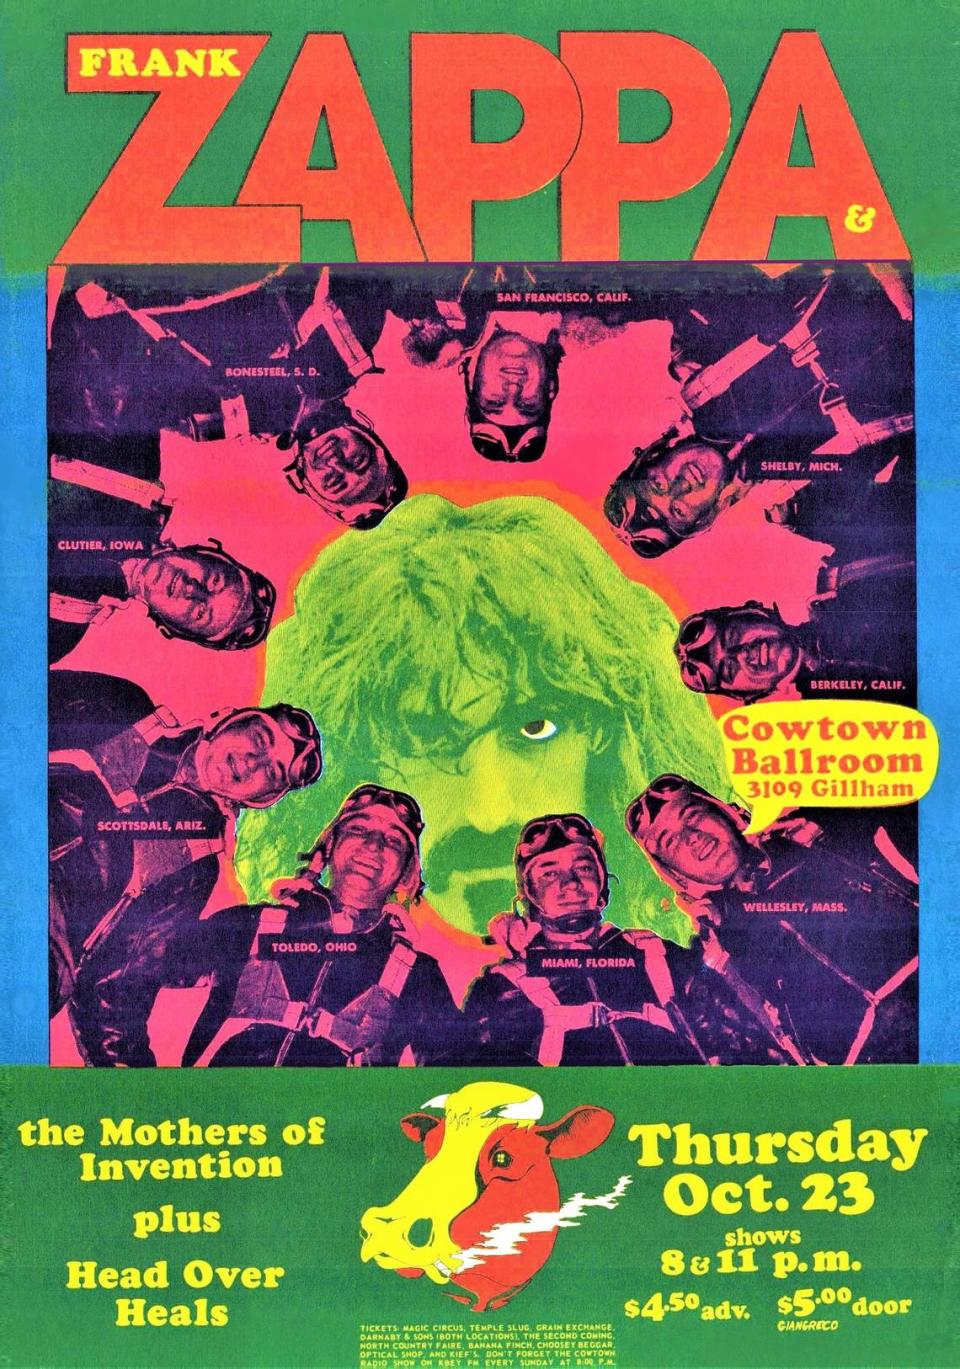 Dennis Giangreco produced this poster for a concert by Frank Zappa and the Mothers of Invention at the Cowtown Ballroom. It is on display at the Kansas City Museum.